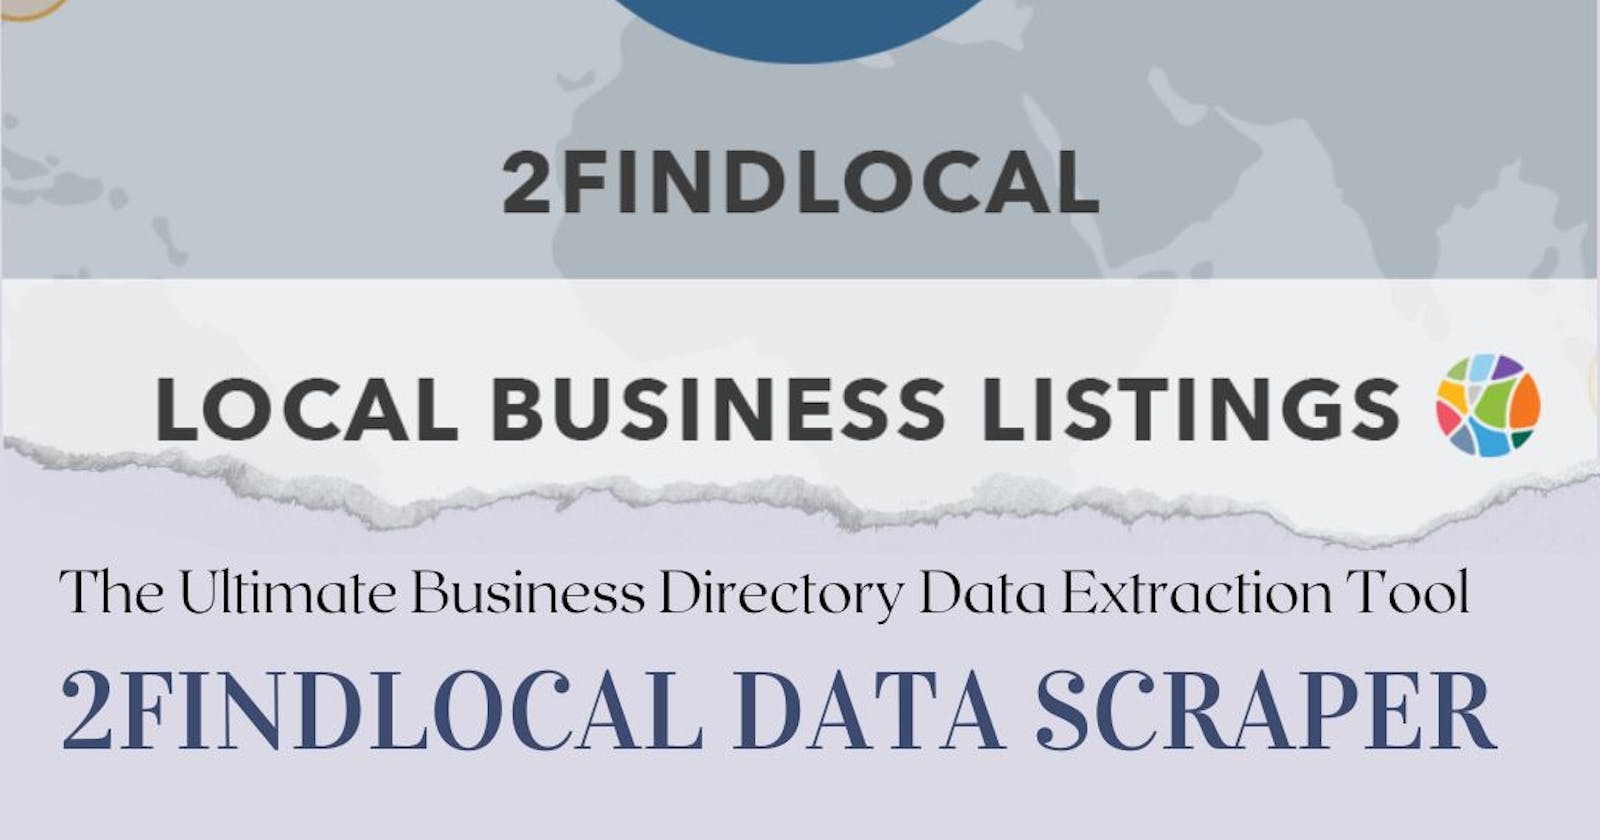 What Is The Best 2Findlocal Data Scraper Software?